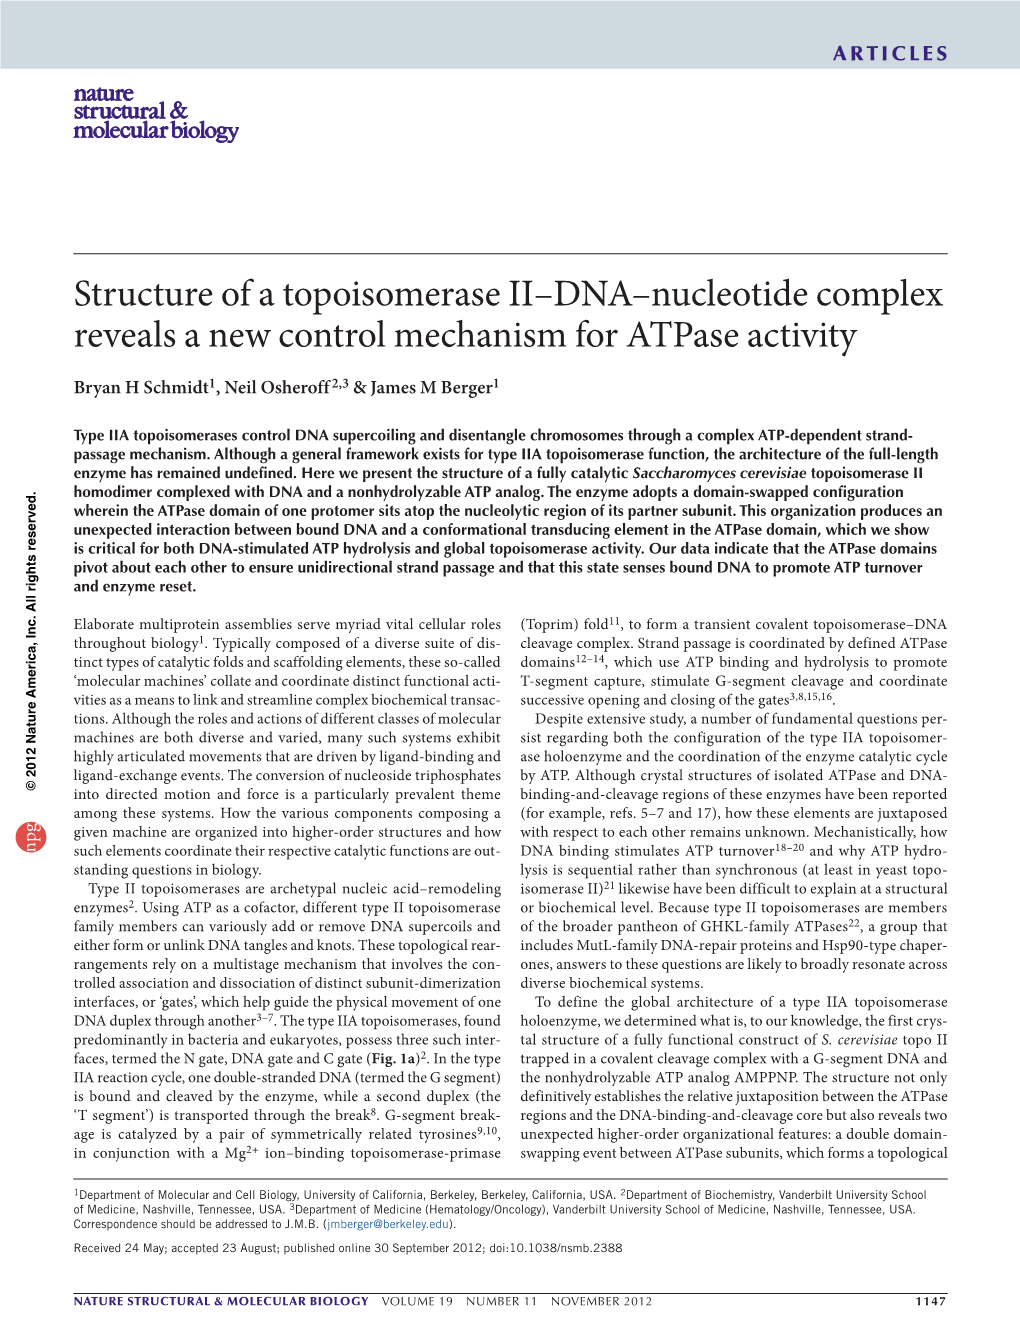 Structure of a Topoisomerase II–DNA–Nucleotide Complex Reveals a New Control Mechanism for Atpase Activity